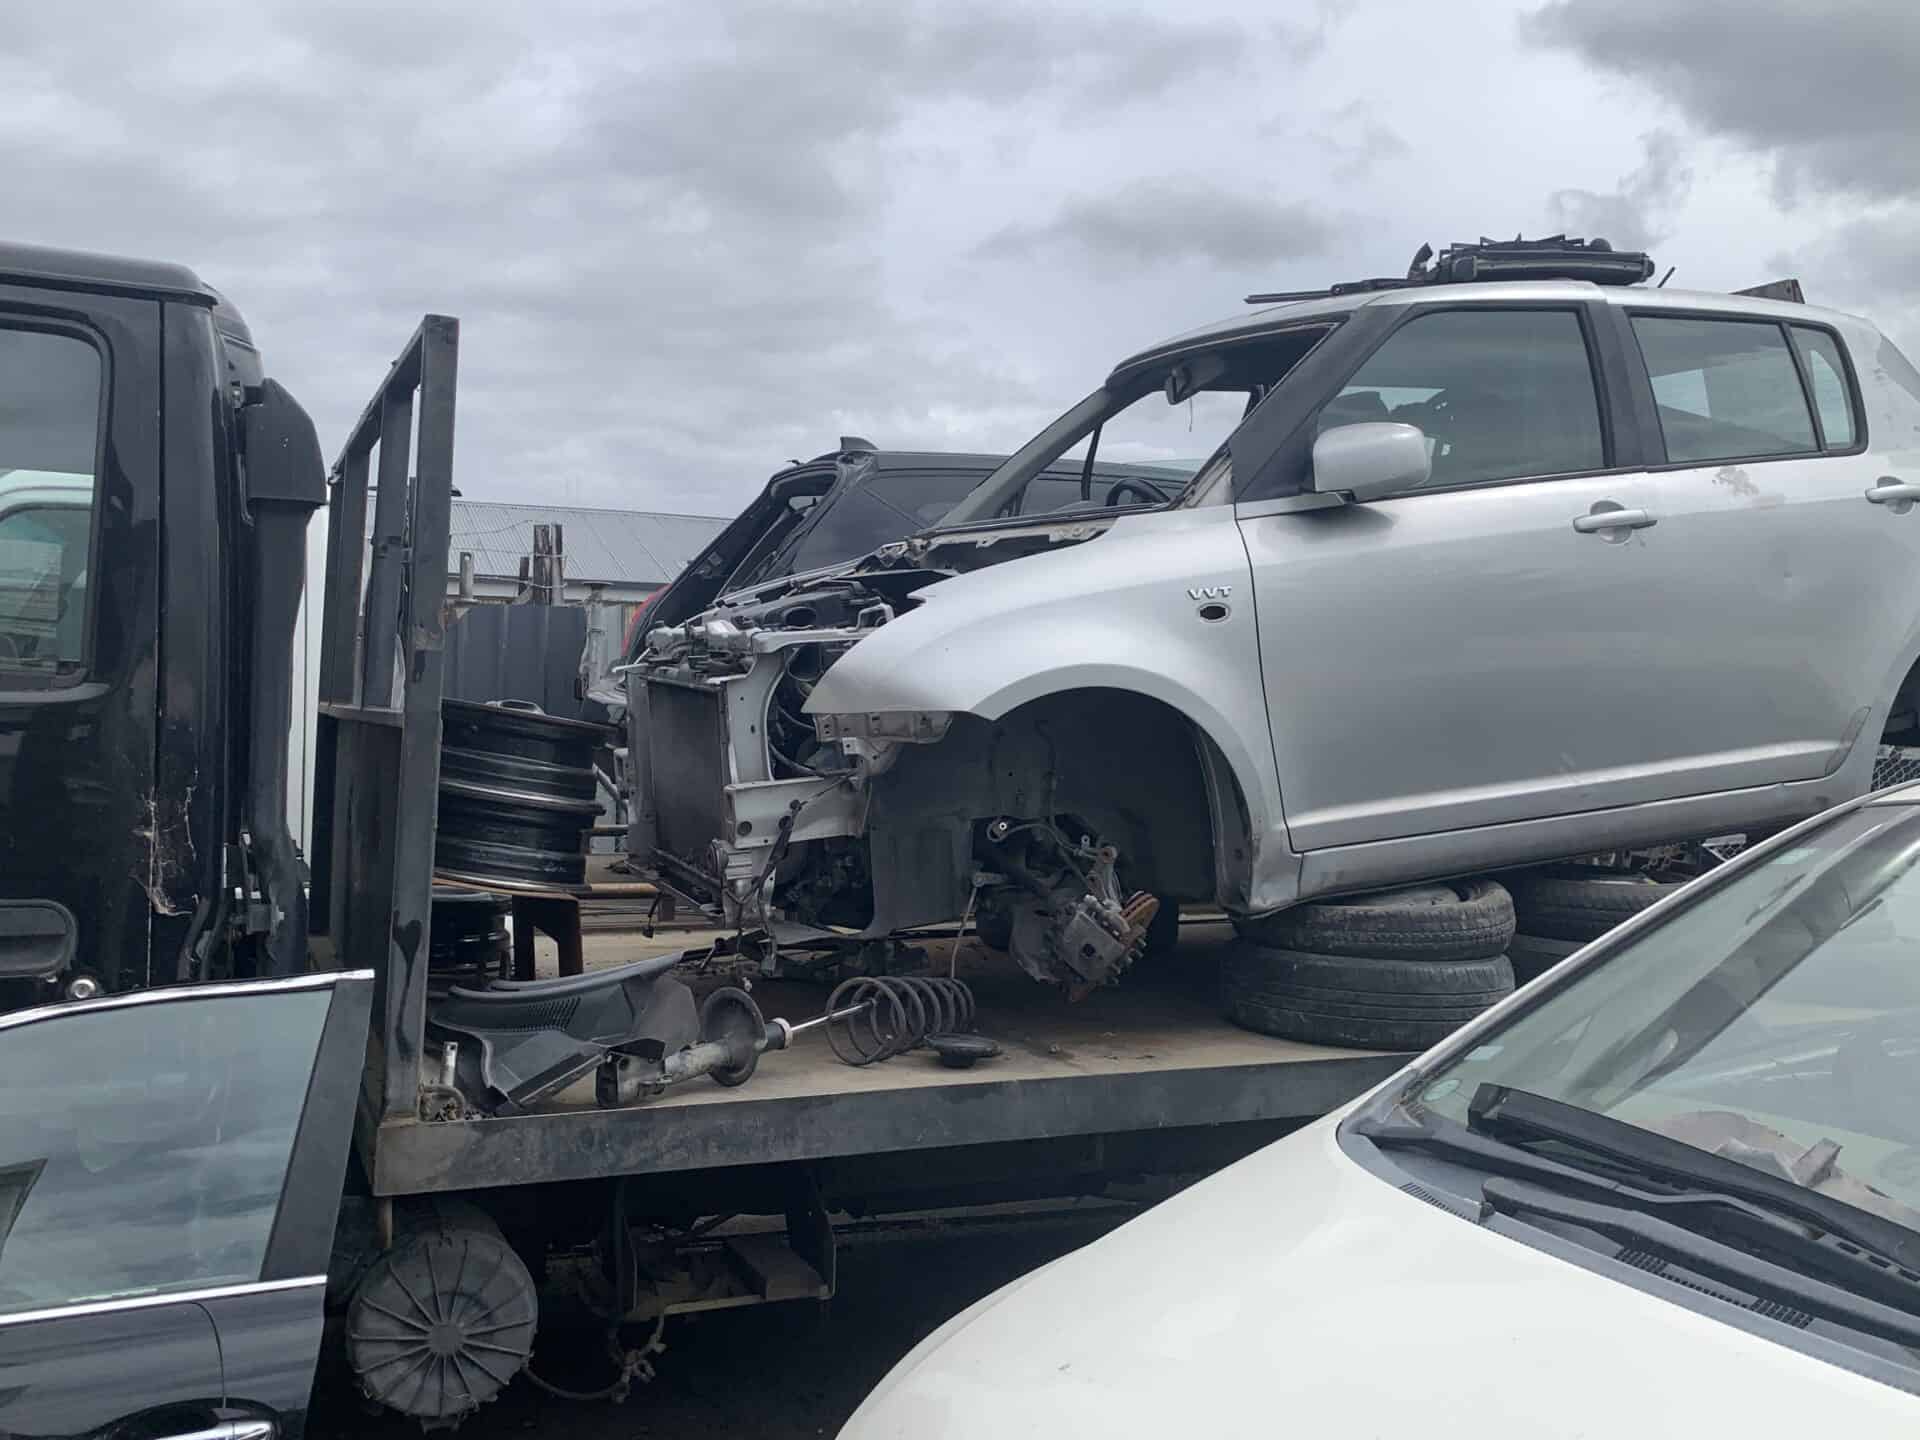 Car Removal Auckland: We Buy & Pickup Scrap Vehicles